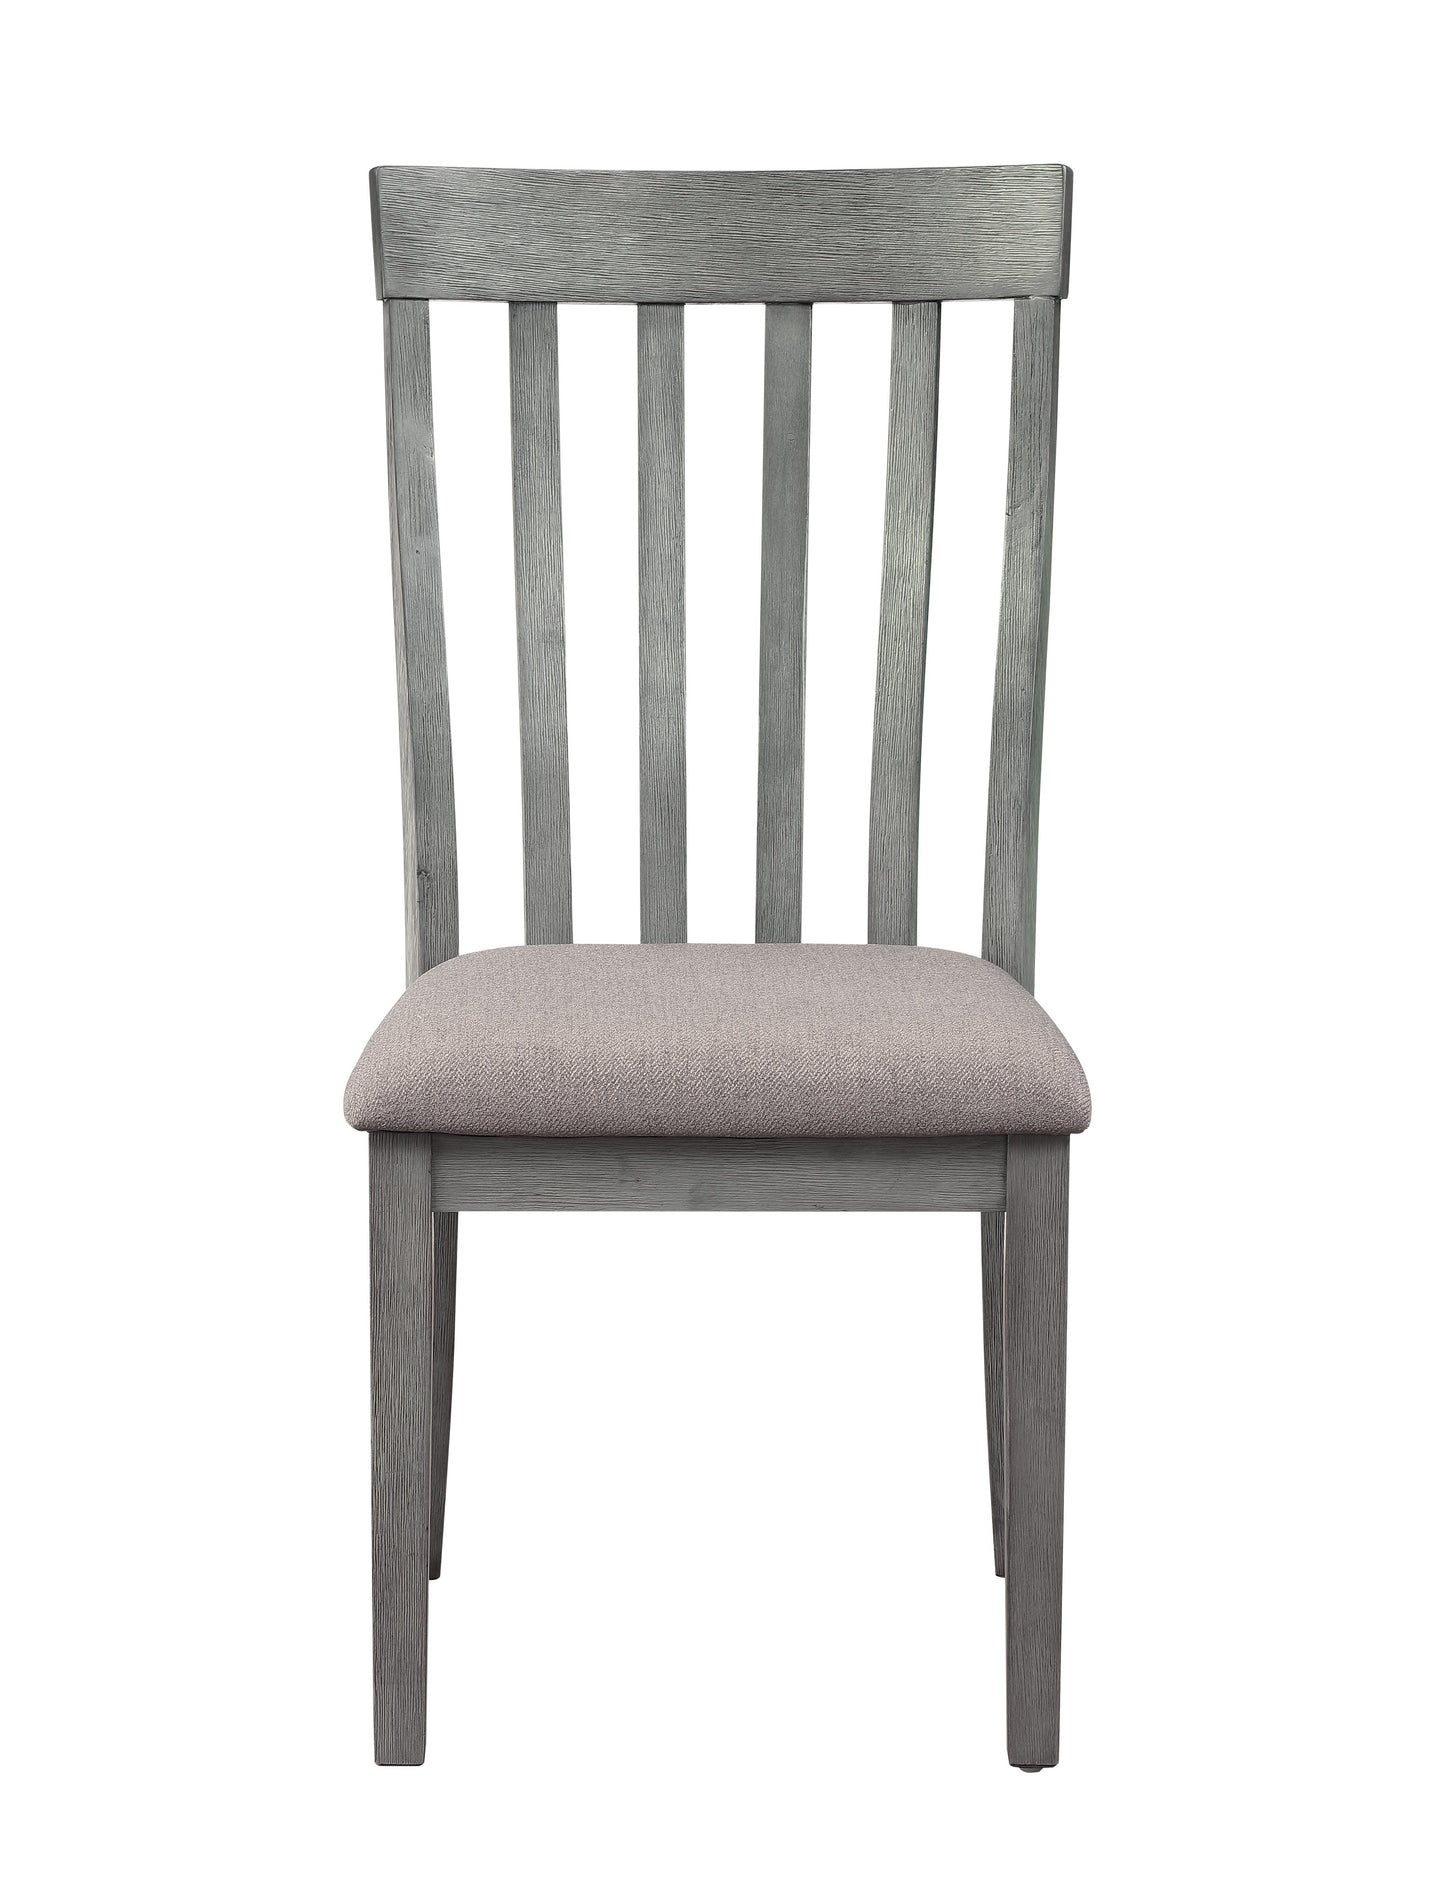 Polena Dining Chair - Grey/Charcoal